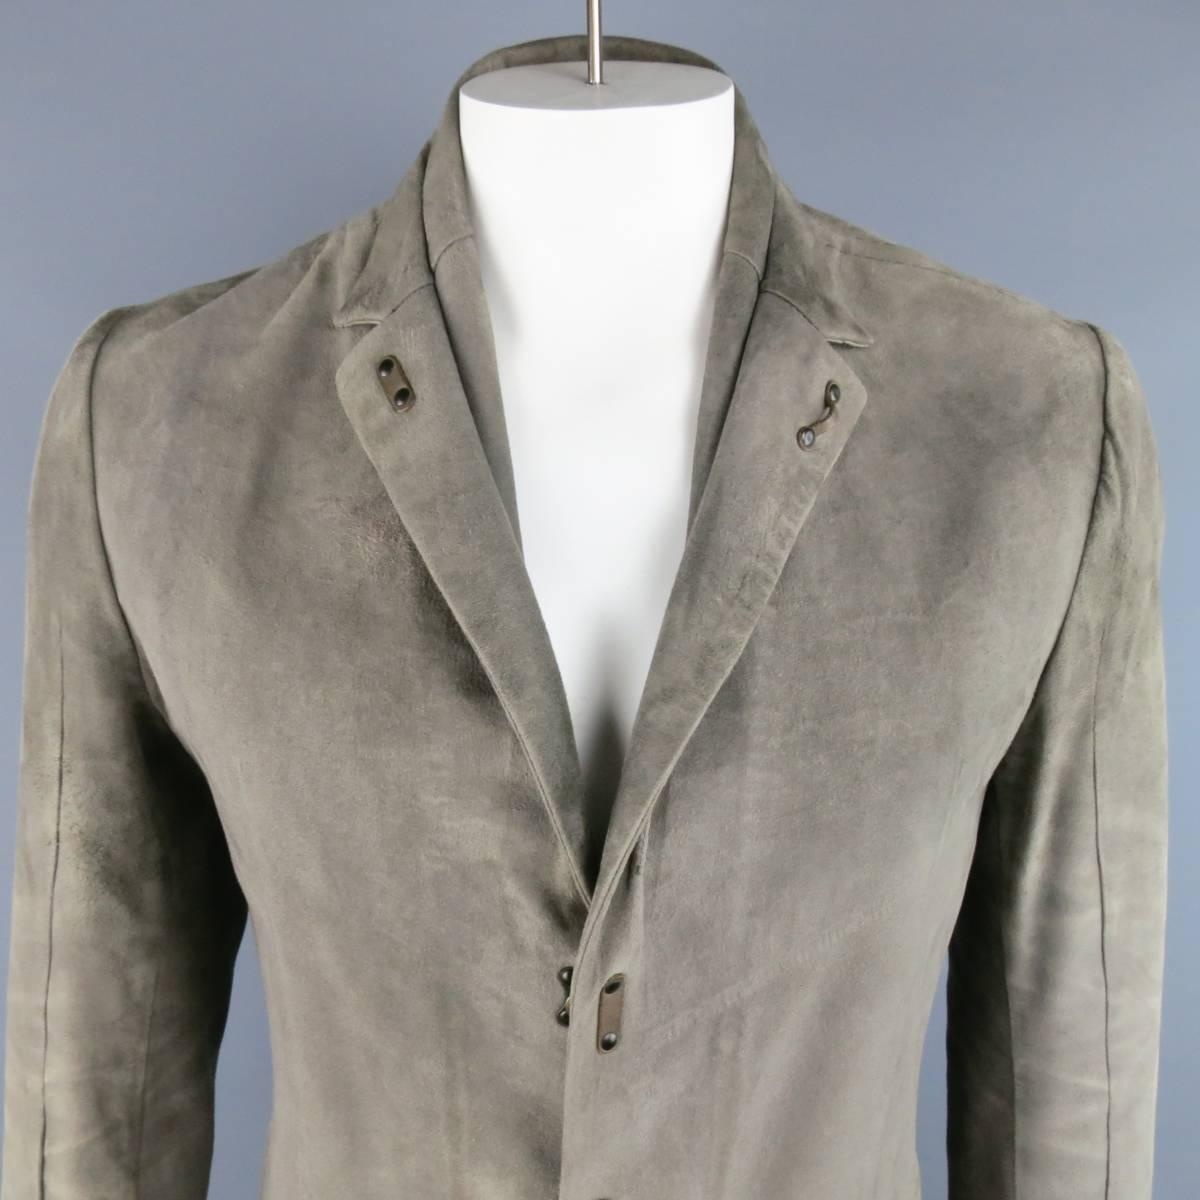 ISAAC SELLAM sport coat style jacket in a light taupe gray suede featuring a notch lapel with leather hook eye closure and underseam detail, triple hook eye closure, hook eye cuffs. Wear throughout. Made in Italy.
 
Good Pre-Owned Condition. Retails